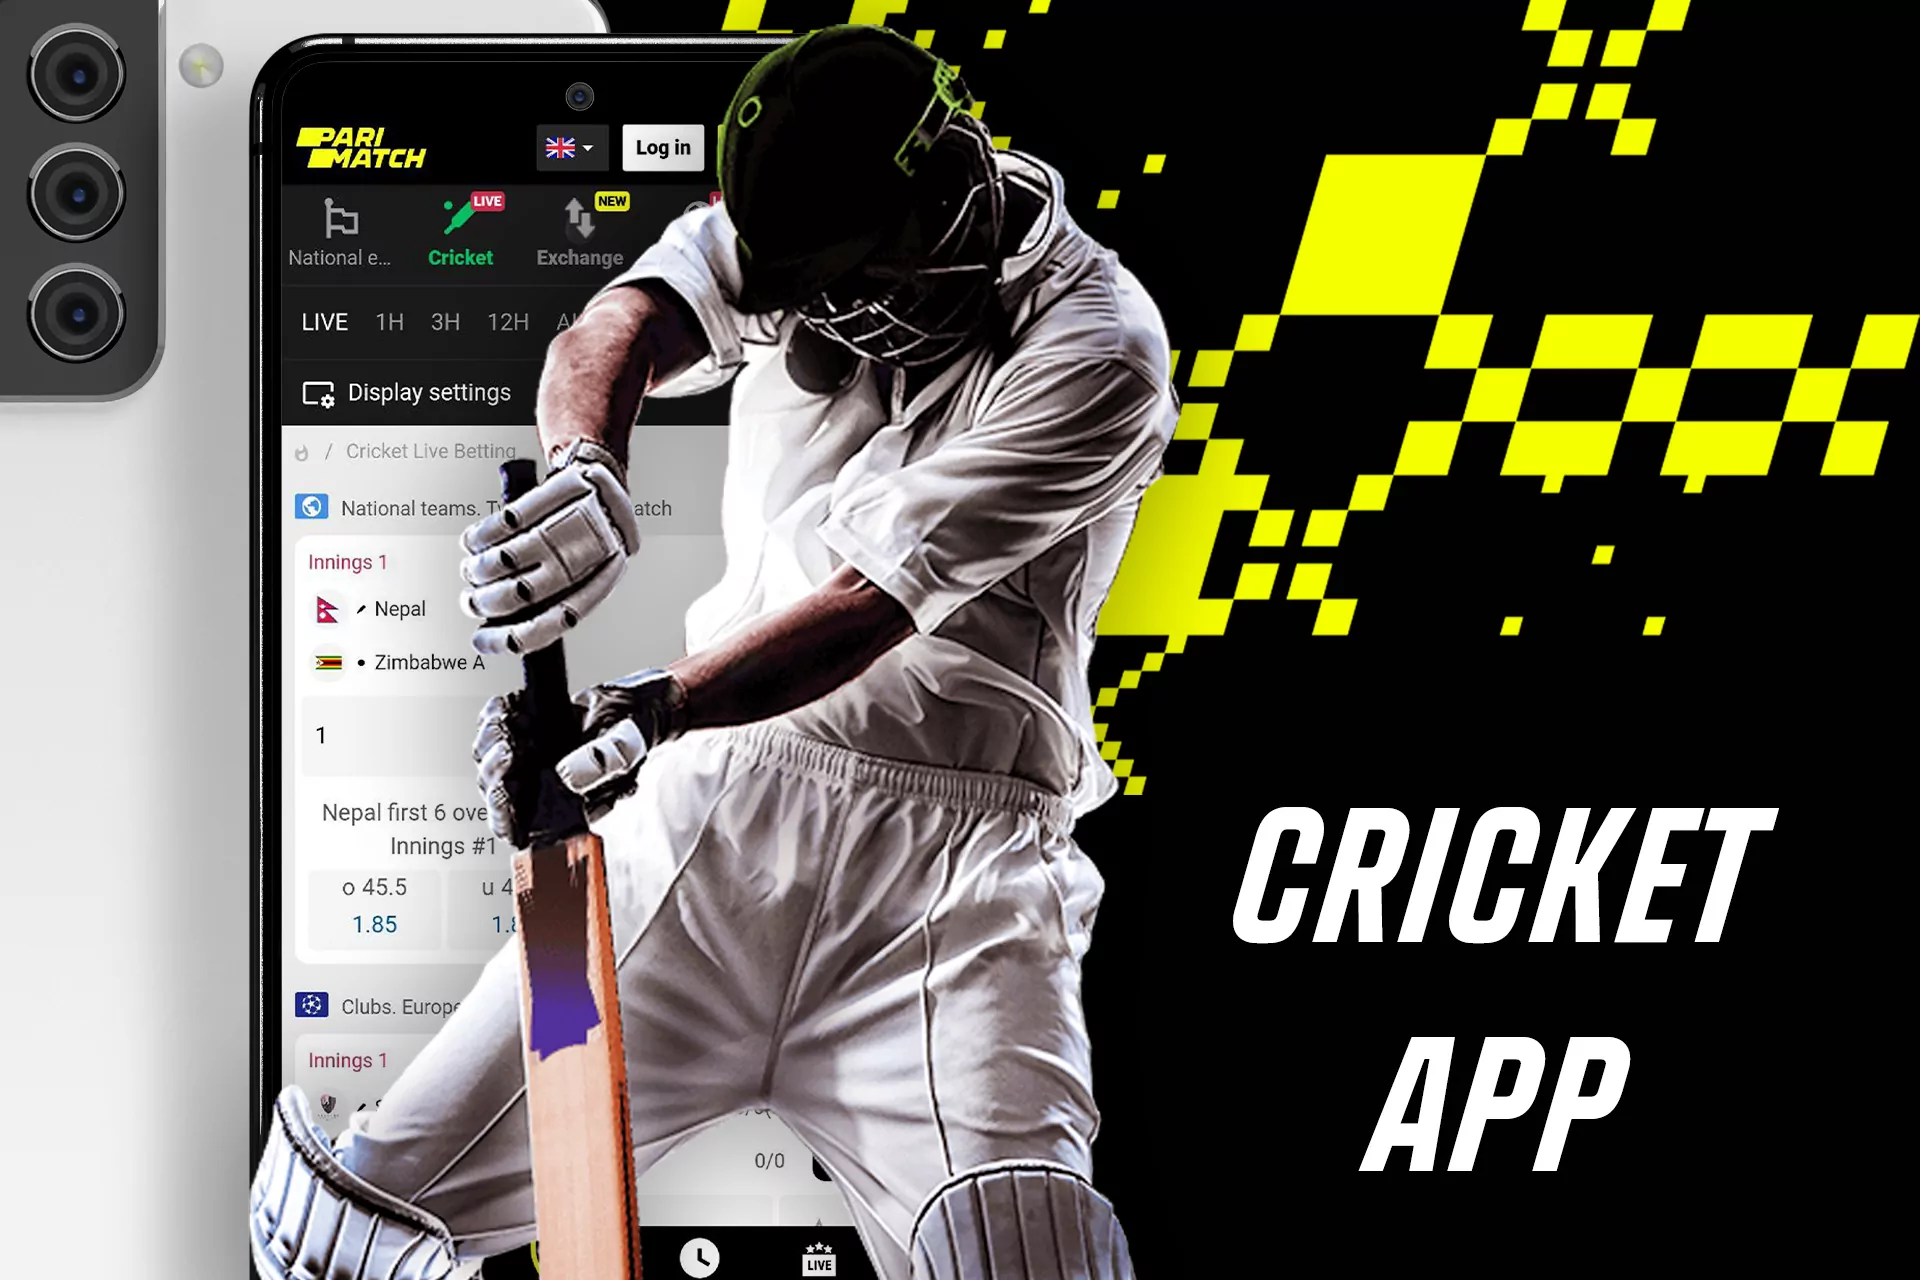 Cricket is the most popular sports discipline for betting in Parimatch India.